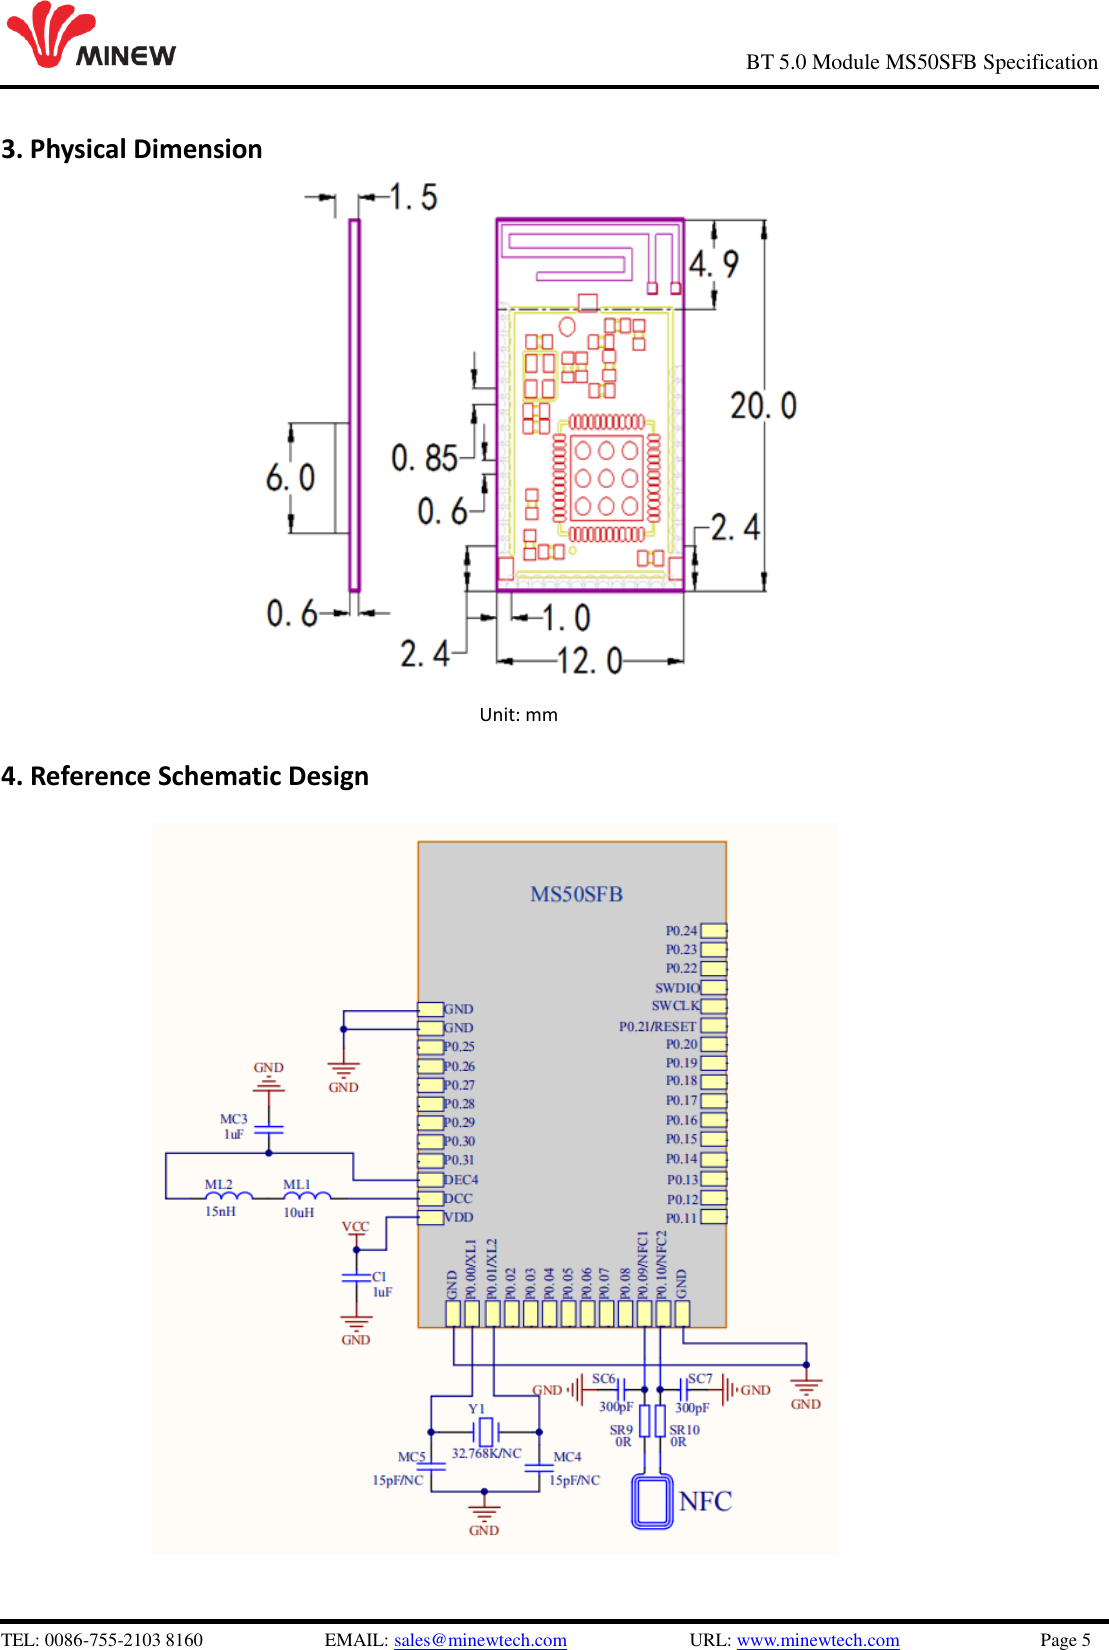   TEL: 0086-755-2103 8160                          EMAIL: sales@minewtech.com                          URL: www.minewtech.com                              Page 5                                                     BT 5.0 Module MS50SFB Specification 3. Physical Dimension          Unit: mm        4. Reference Schematic Design                       Unit: mm 